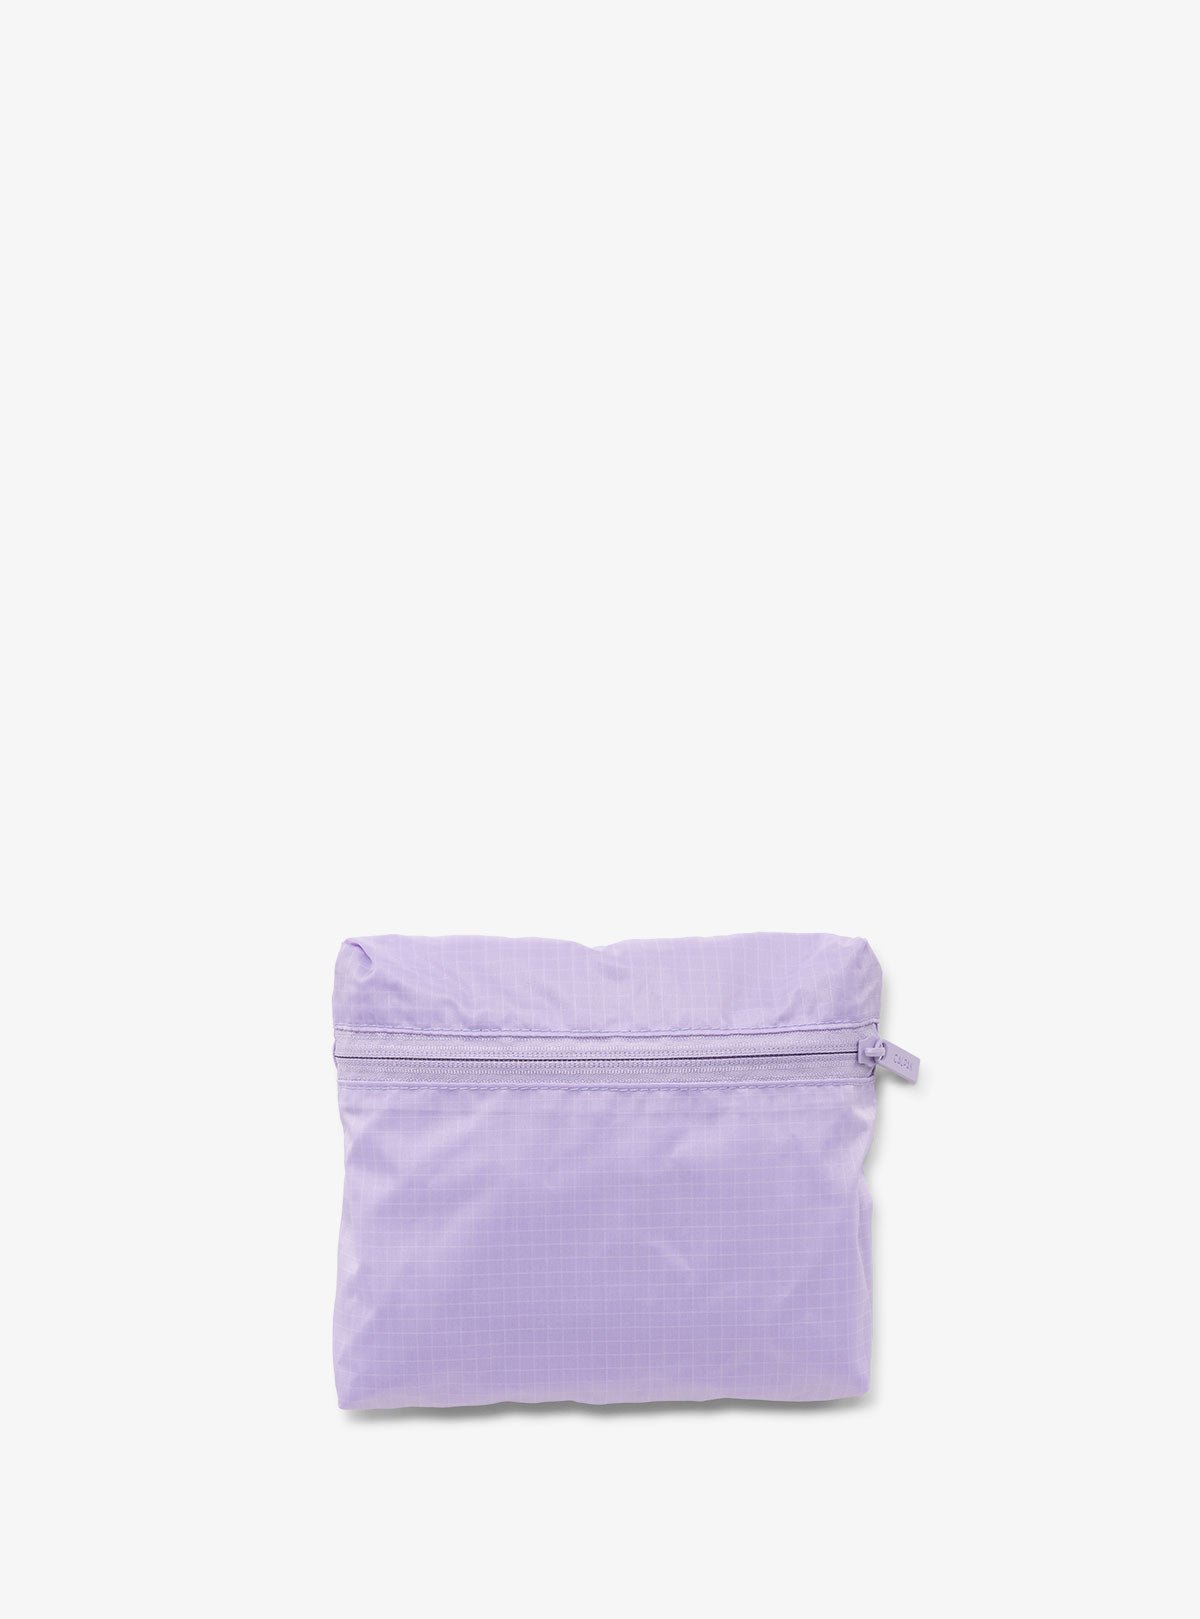 Foldable tote bag in lilac for shopping